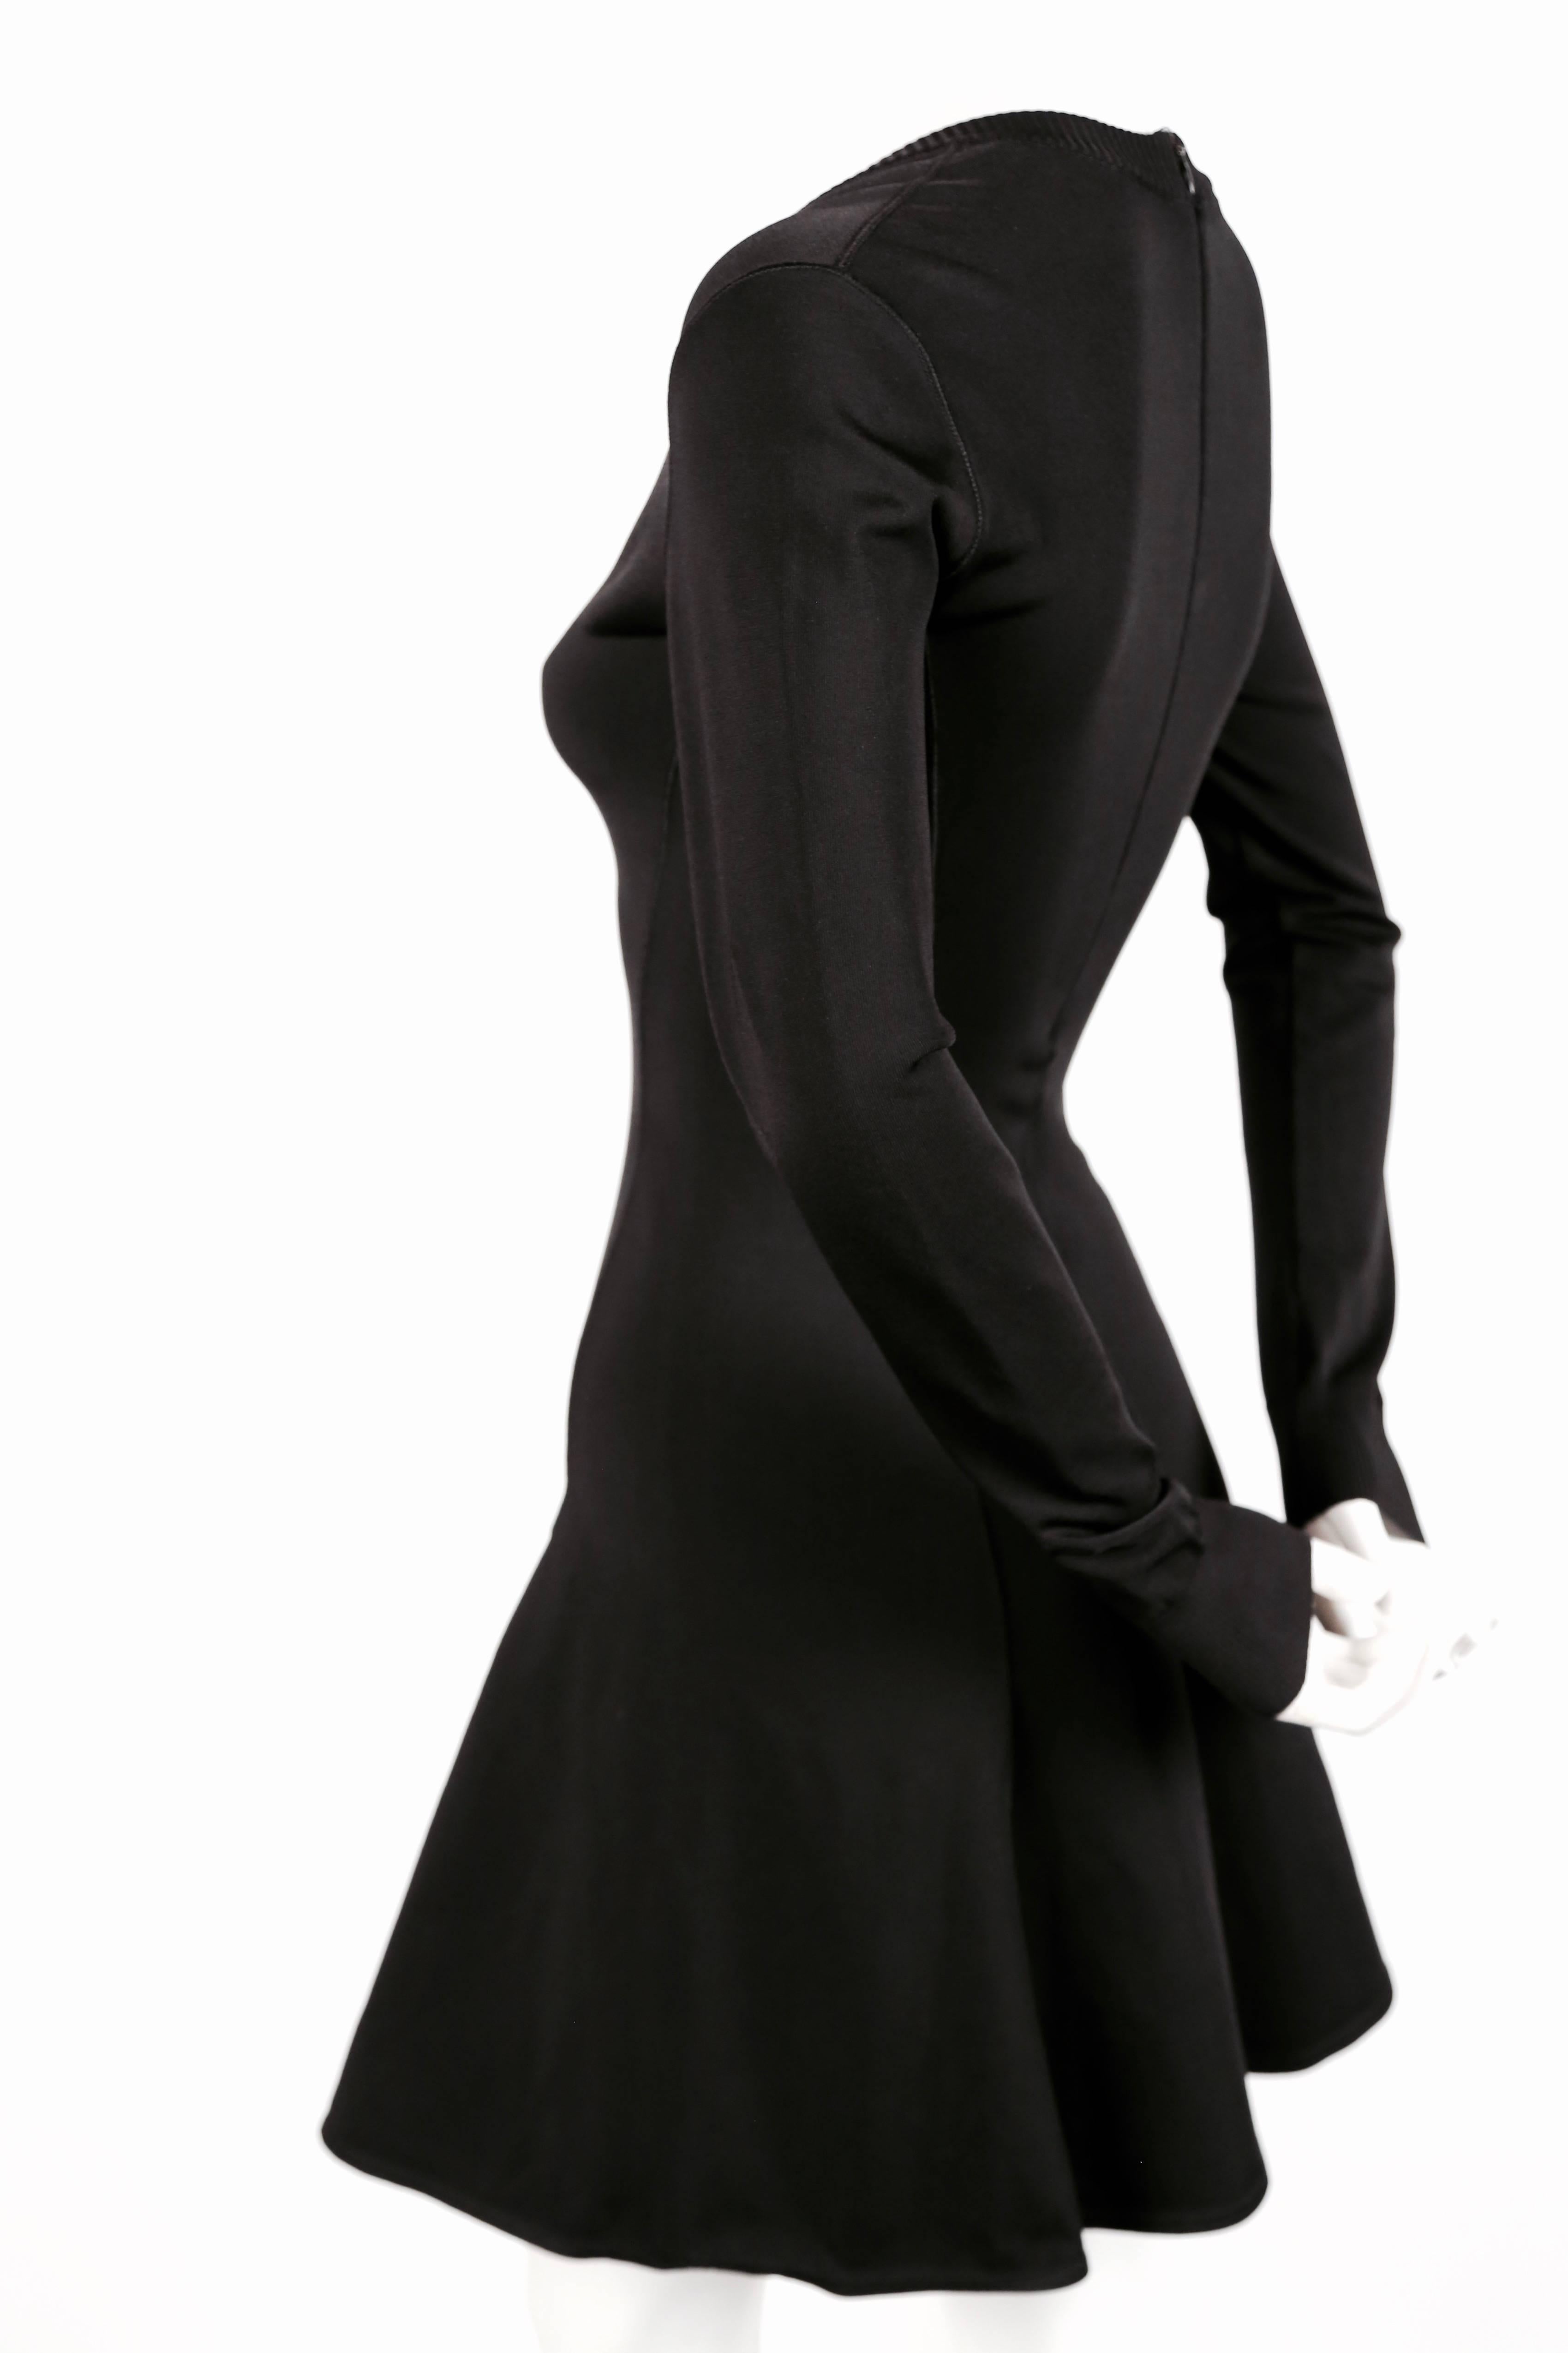 Jet black skater dress with V-neckline and long sleeves designed by Azzedine Alaia dating to the early 1990's. Size XS. Approximate measurements (unstretched): shoulder 14